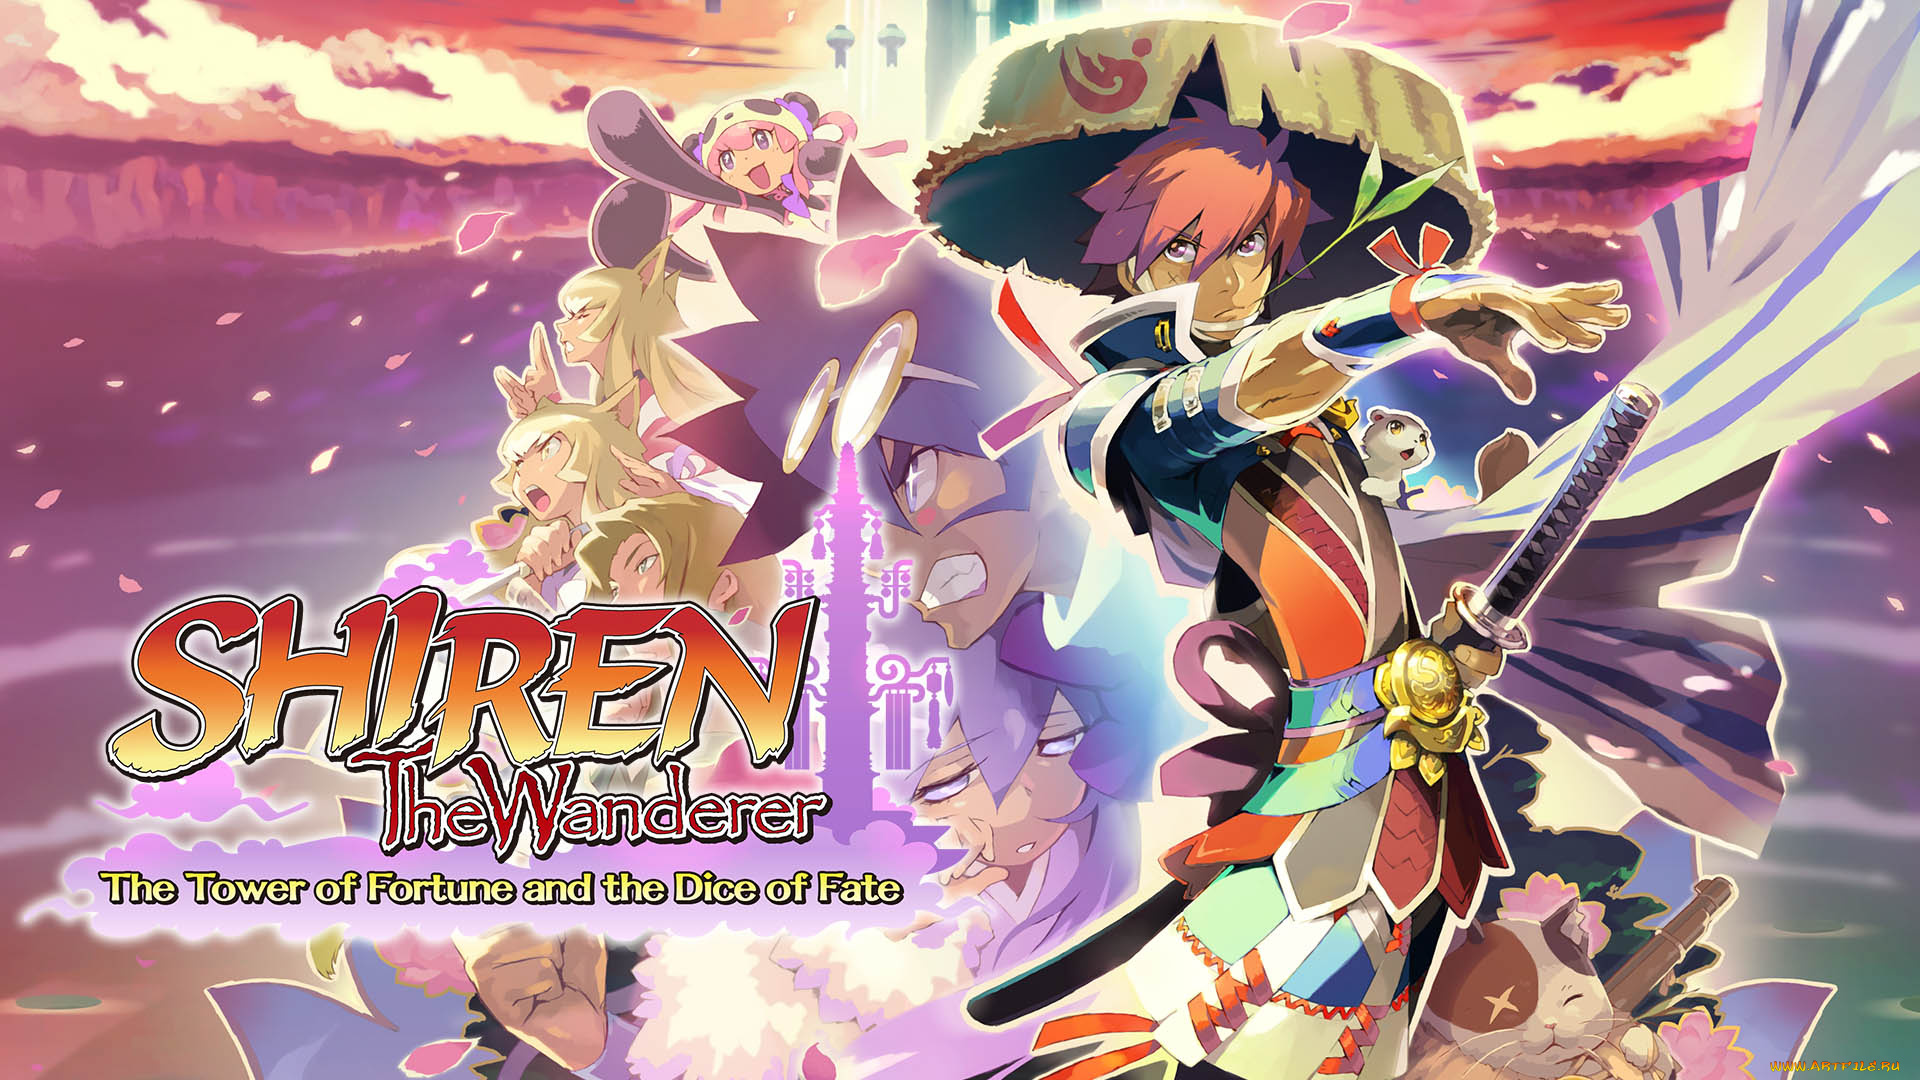 shiren, the, wanderer, the, tower, of, fortune, a, видео, игры, ---другое, shiren, the, wanderer, tower, of, fortune, a